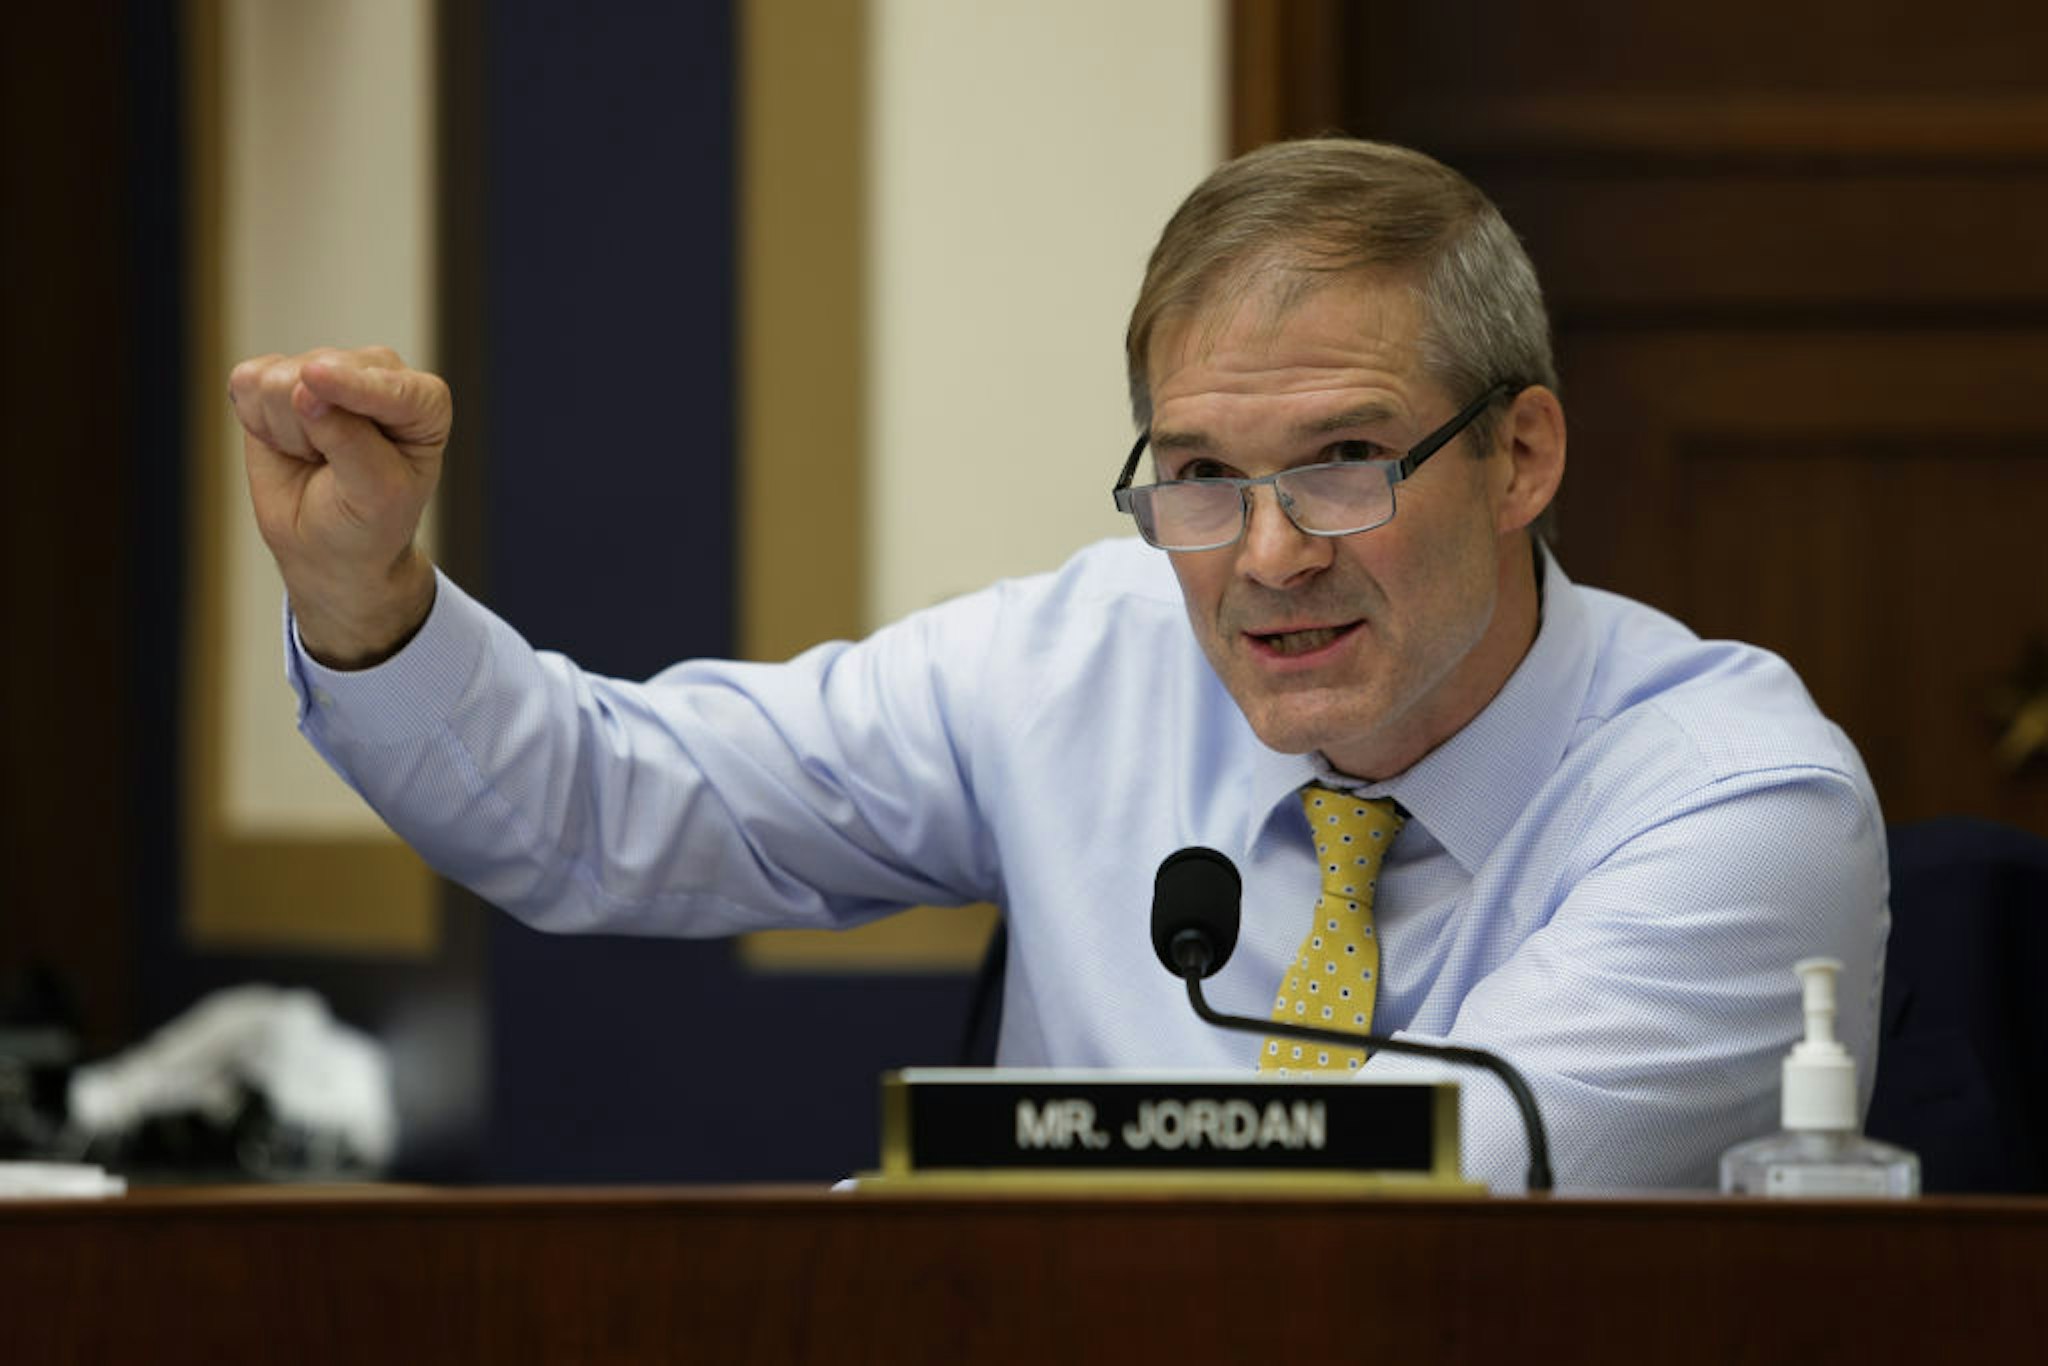 WASHINGTON, DC - JULY 29: Congressman Jim Jordan (R-OH) speaks during an Antitrust, Commercial and Administrative Law Subcommittee hearing on "Online platforms and market power. Examining the dominance of Amazon, Facebook, Google and Apple" on Capitol Hill on July 29, 2020 in Washington, DC. (Photo by Graeme Jennings - Pool/Getty Images)